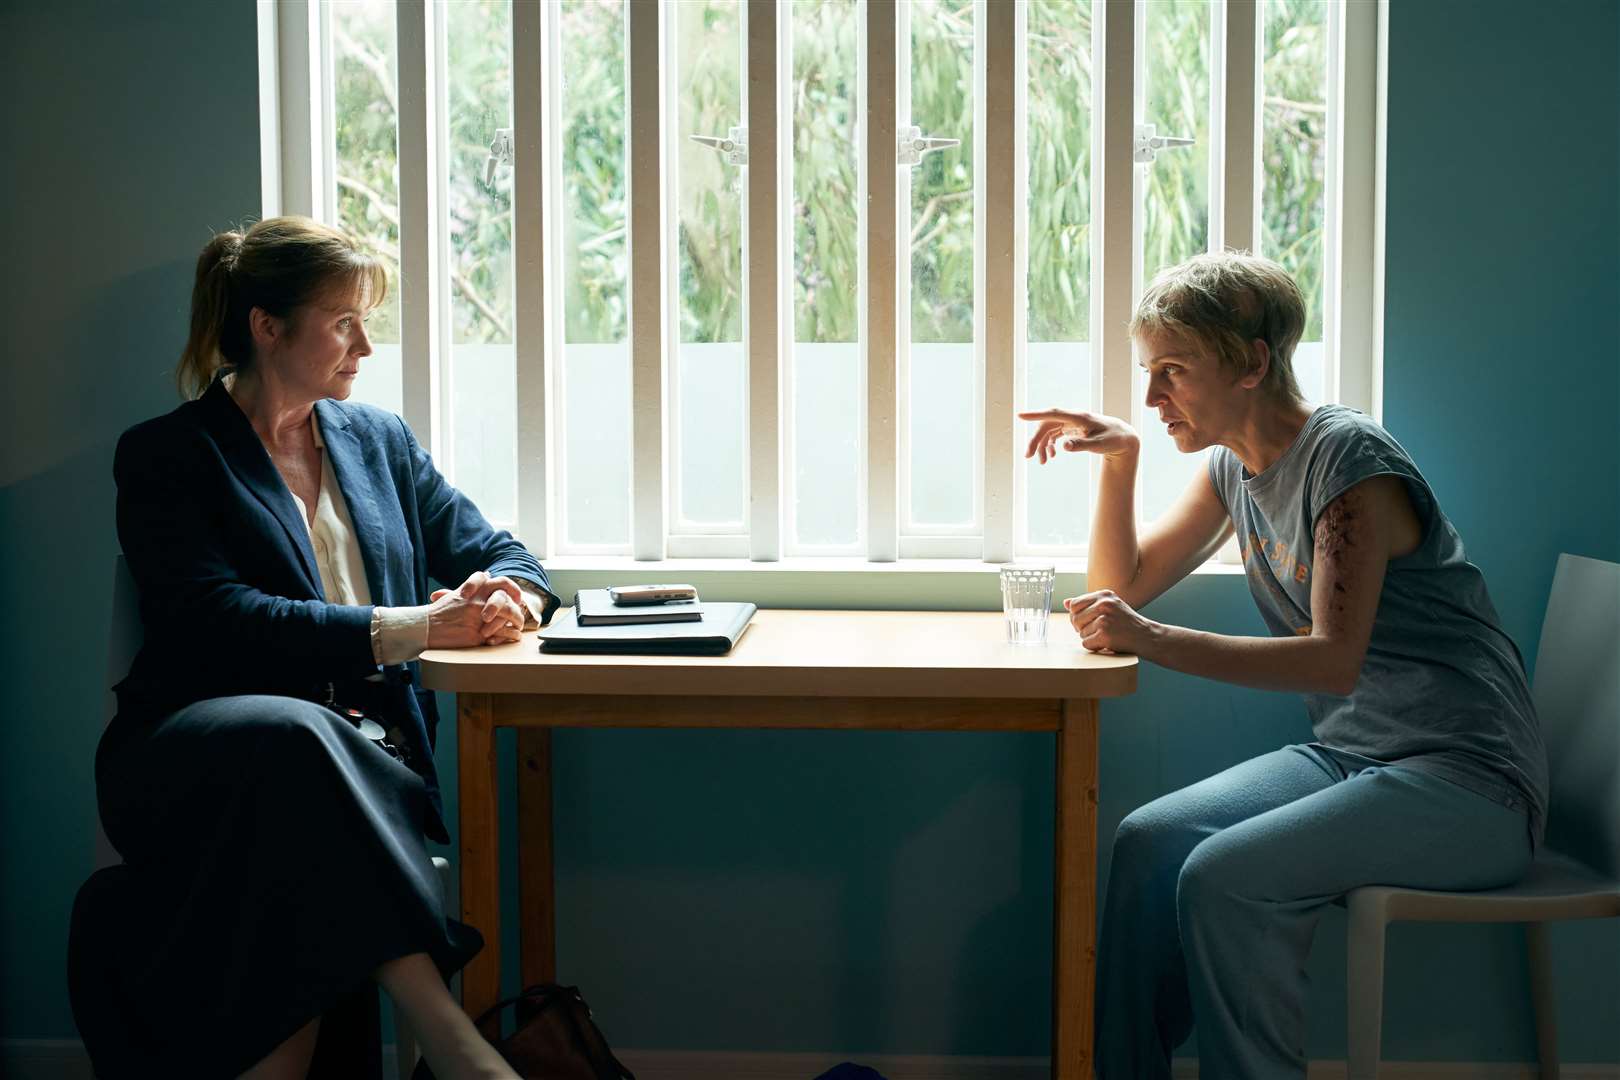 Emily Watson as Dr Emma Robertson with Denise Gough as Connie Mortensen in Too Close. Picture: ITV